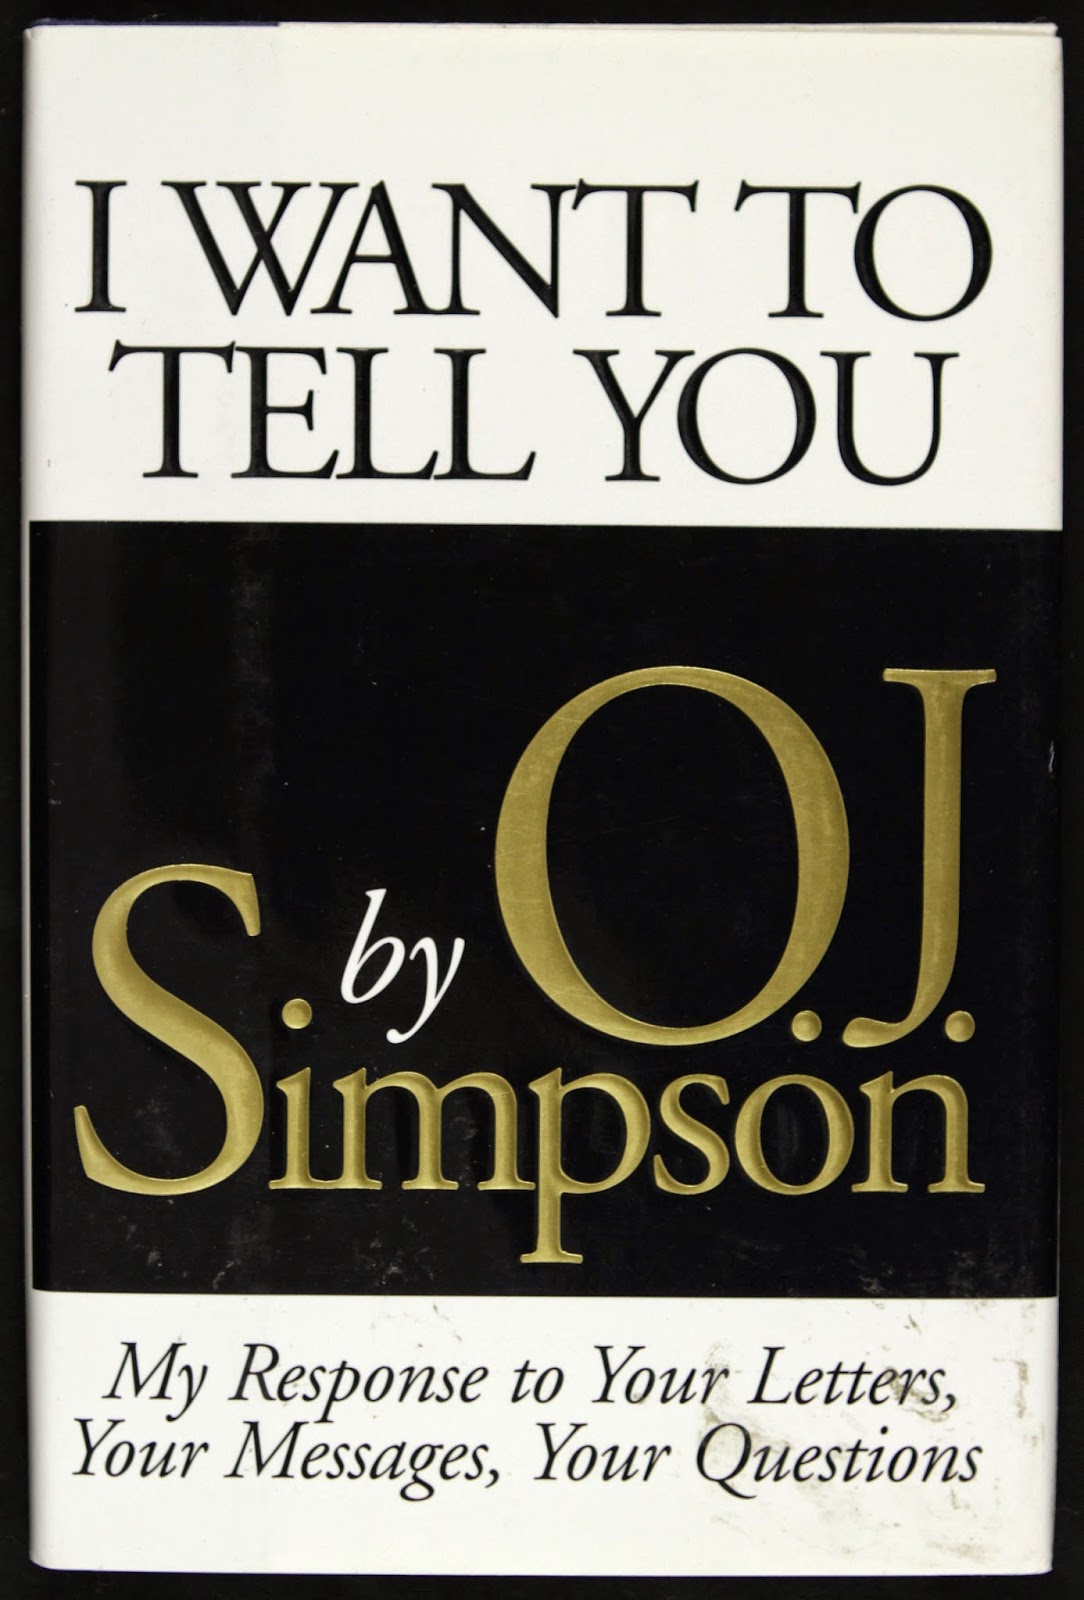 http://discover.halifaxpubliclibraries.ca/?q=title:i%20want%20to%20tell%20you%20author:simpson